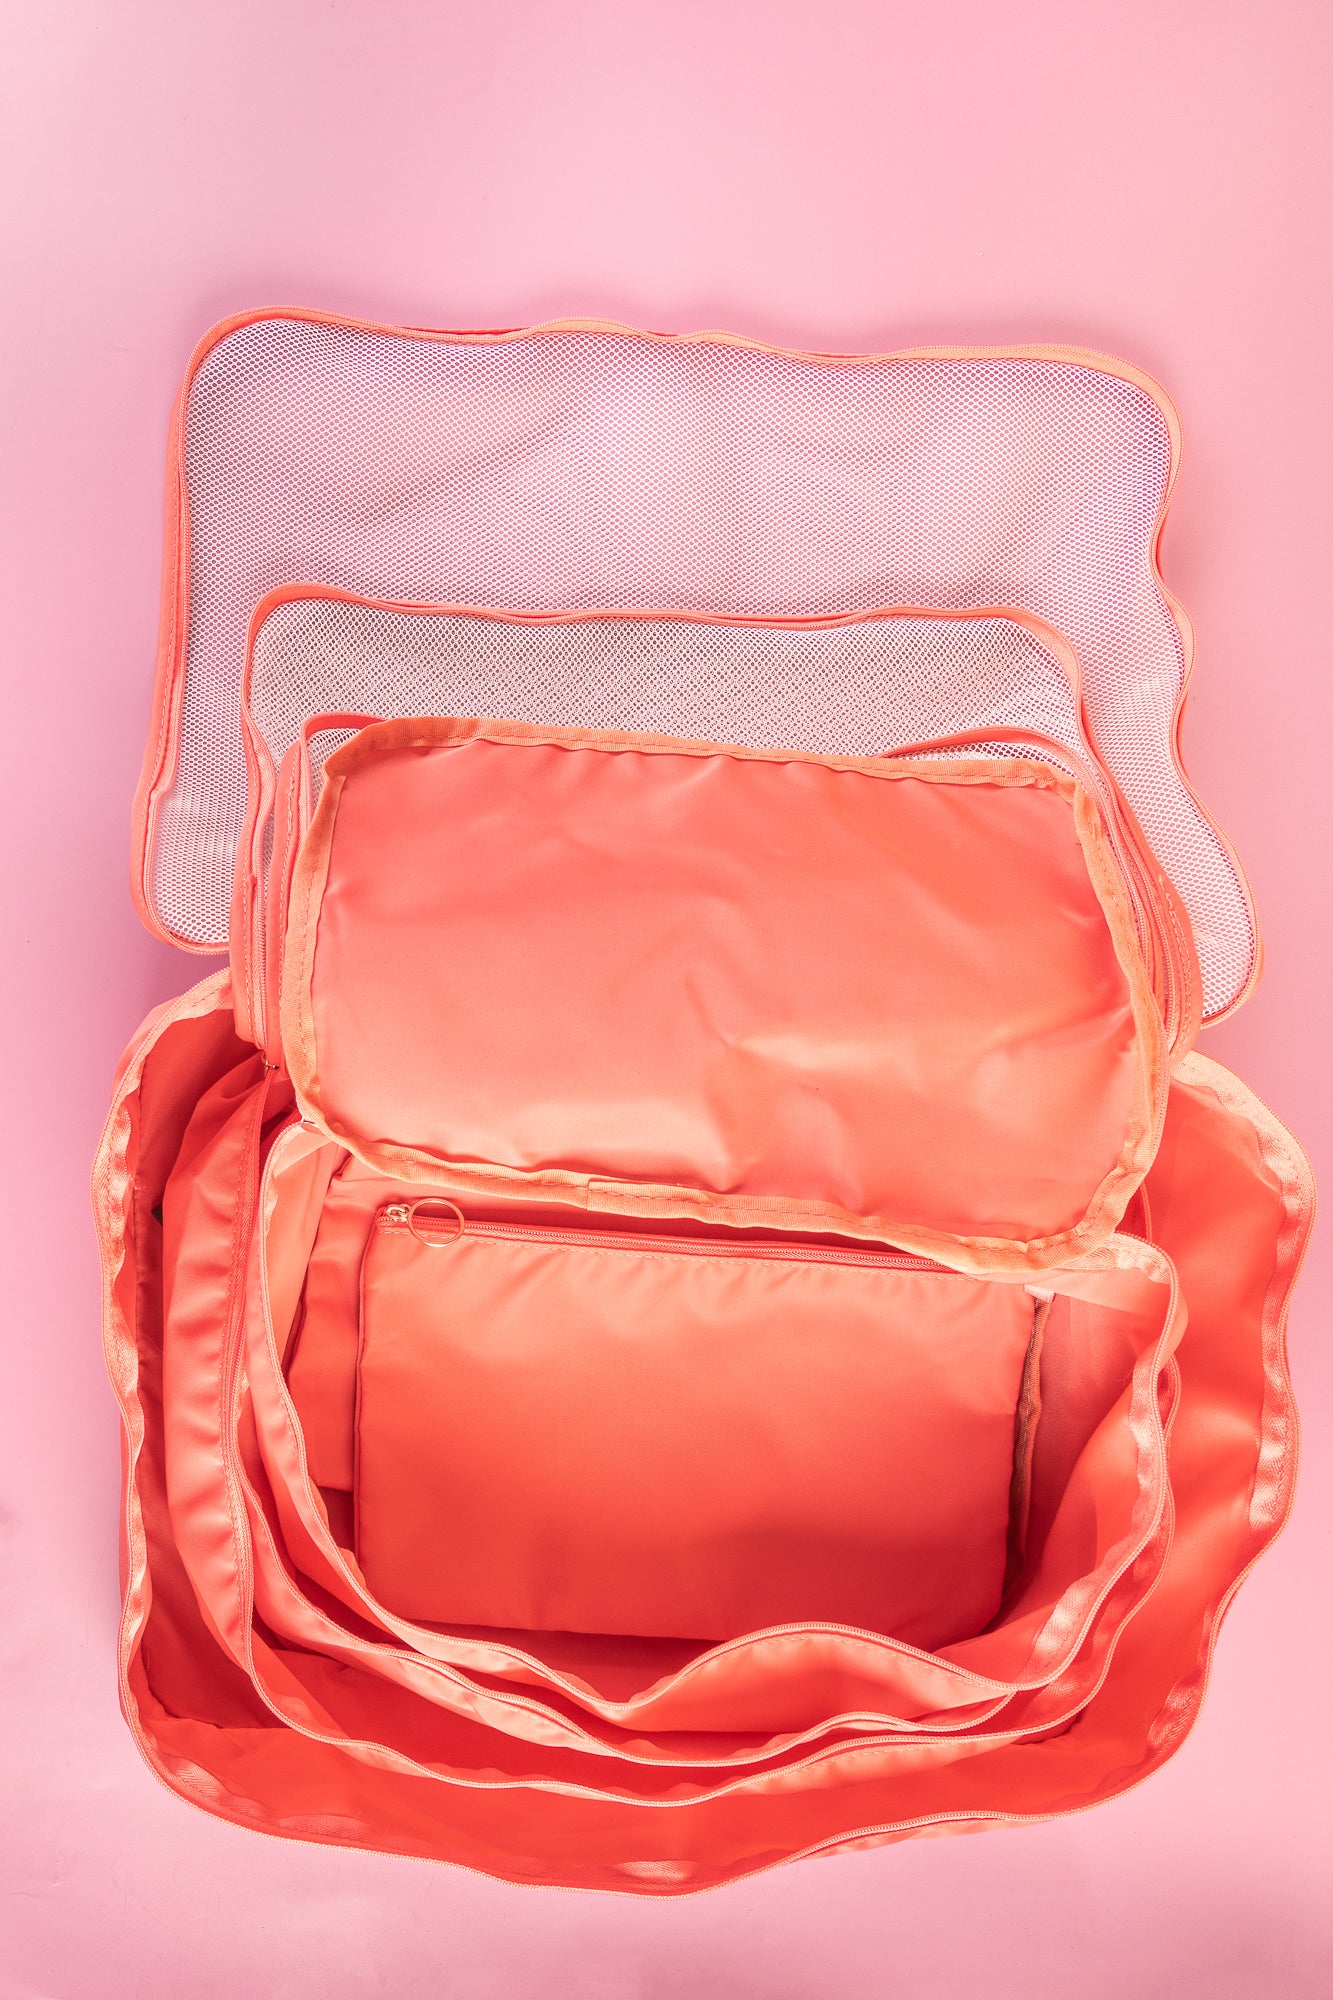 pink packing cubes opened up on a pink background